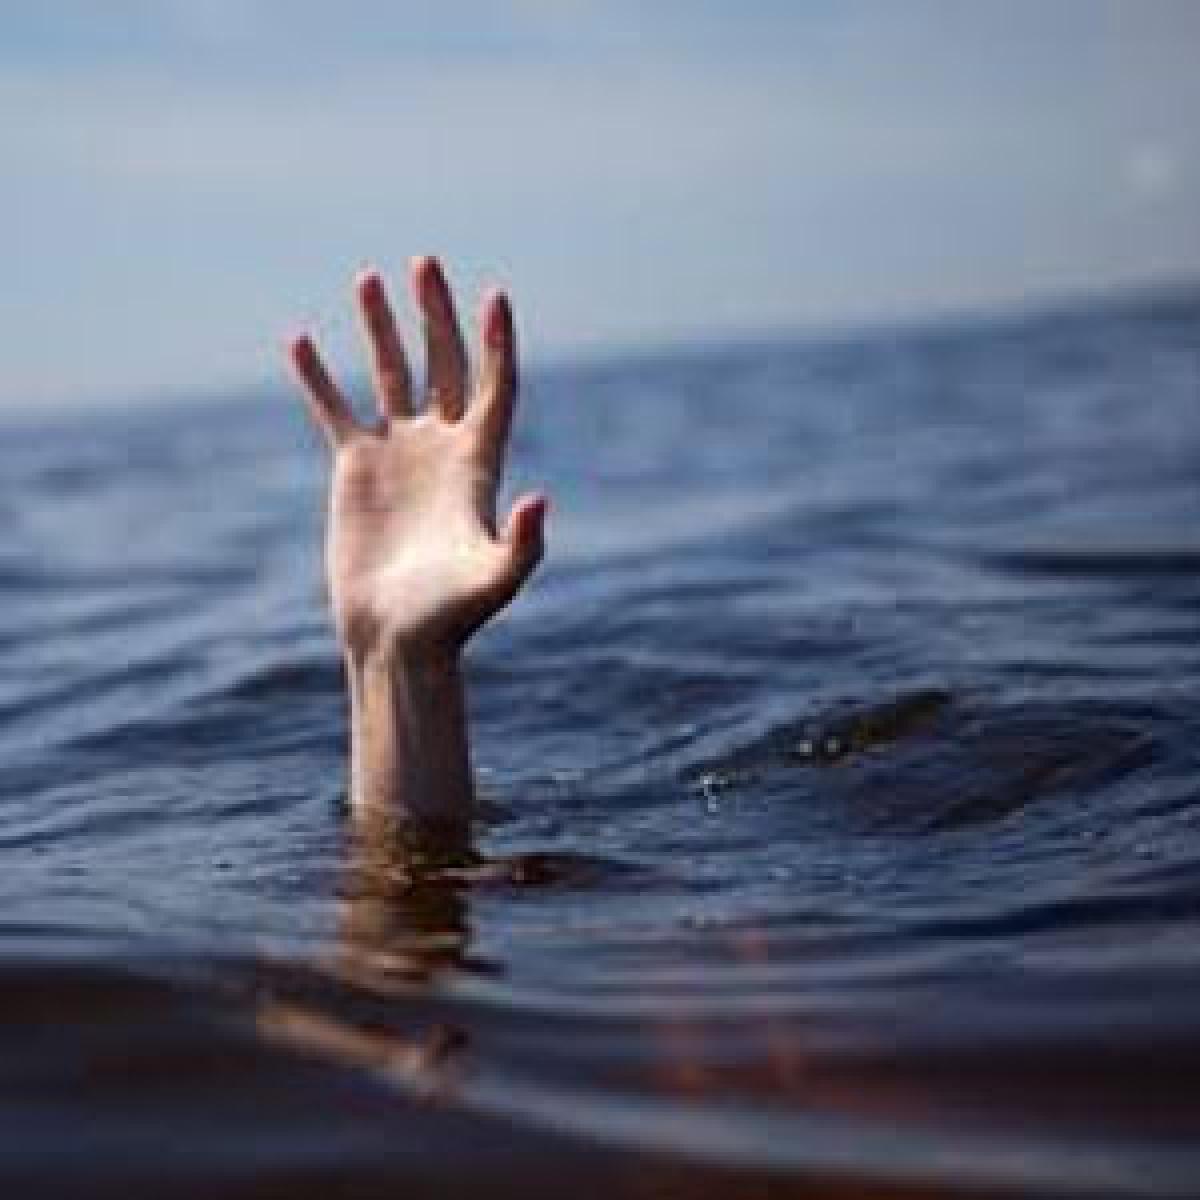 Two students drown in Alwal temple lake